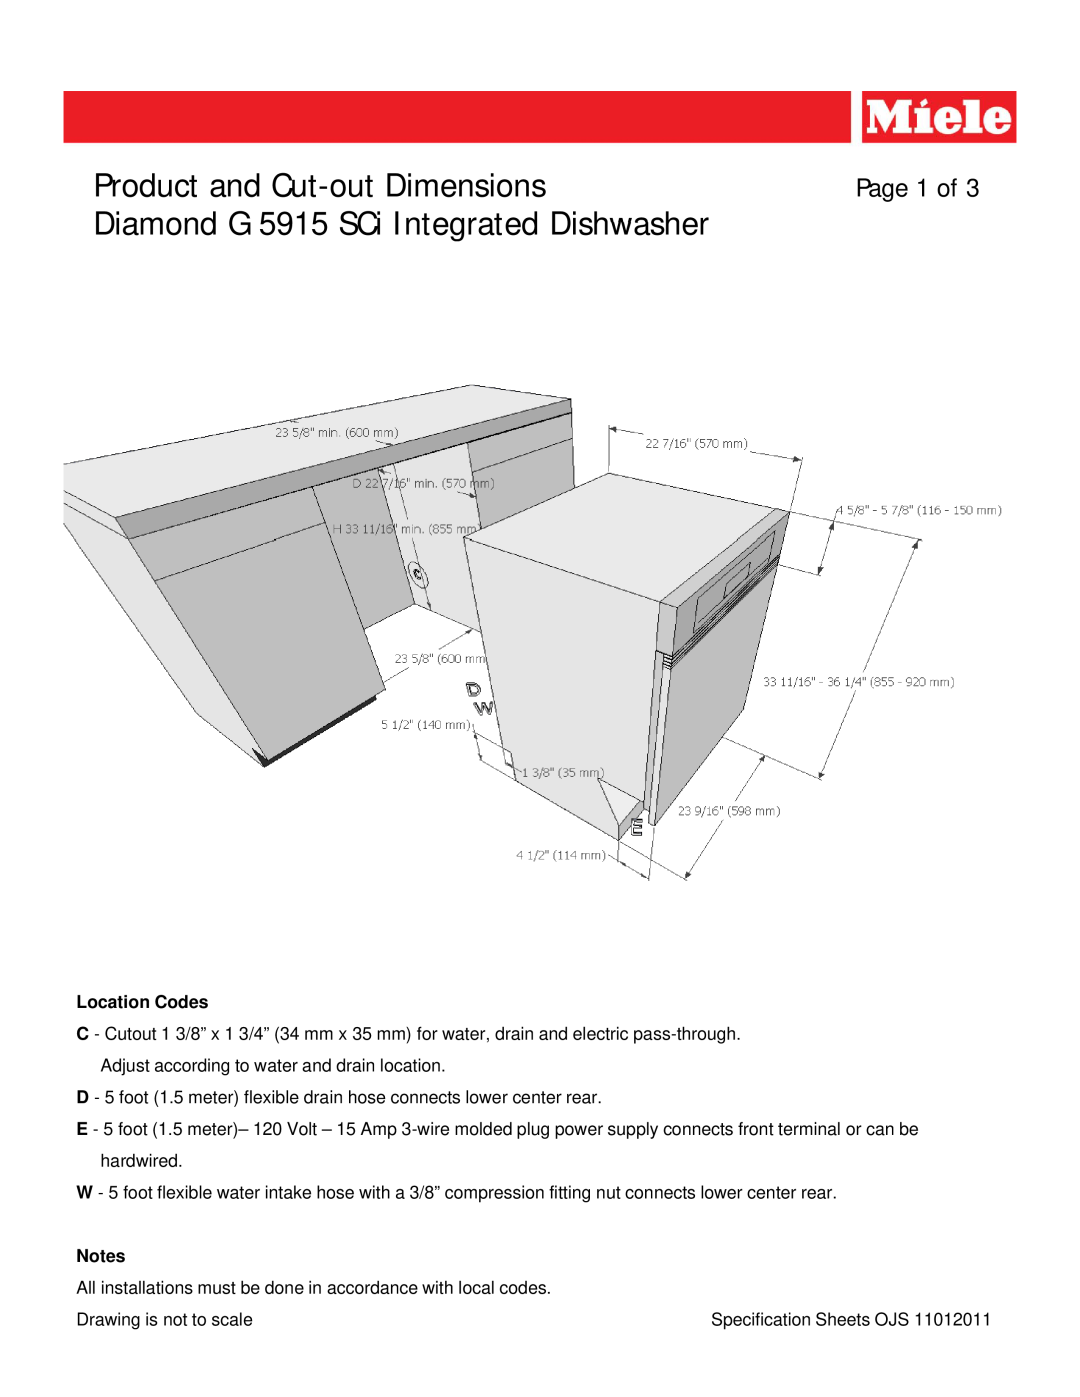 Miele G 5915 SCI dimensions Product and Cut-outDimensions, Diamond G 5915 SCi Integrated Dishwasher, Page 1 of 